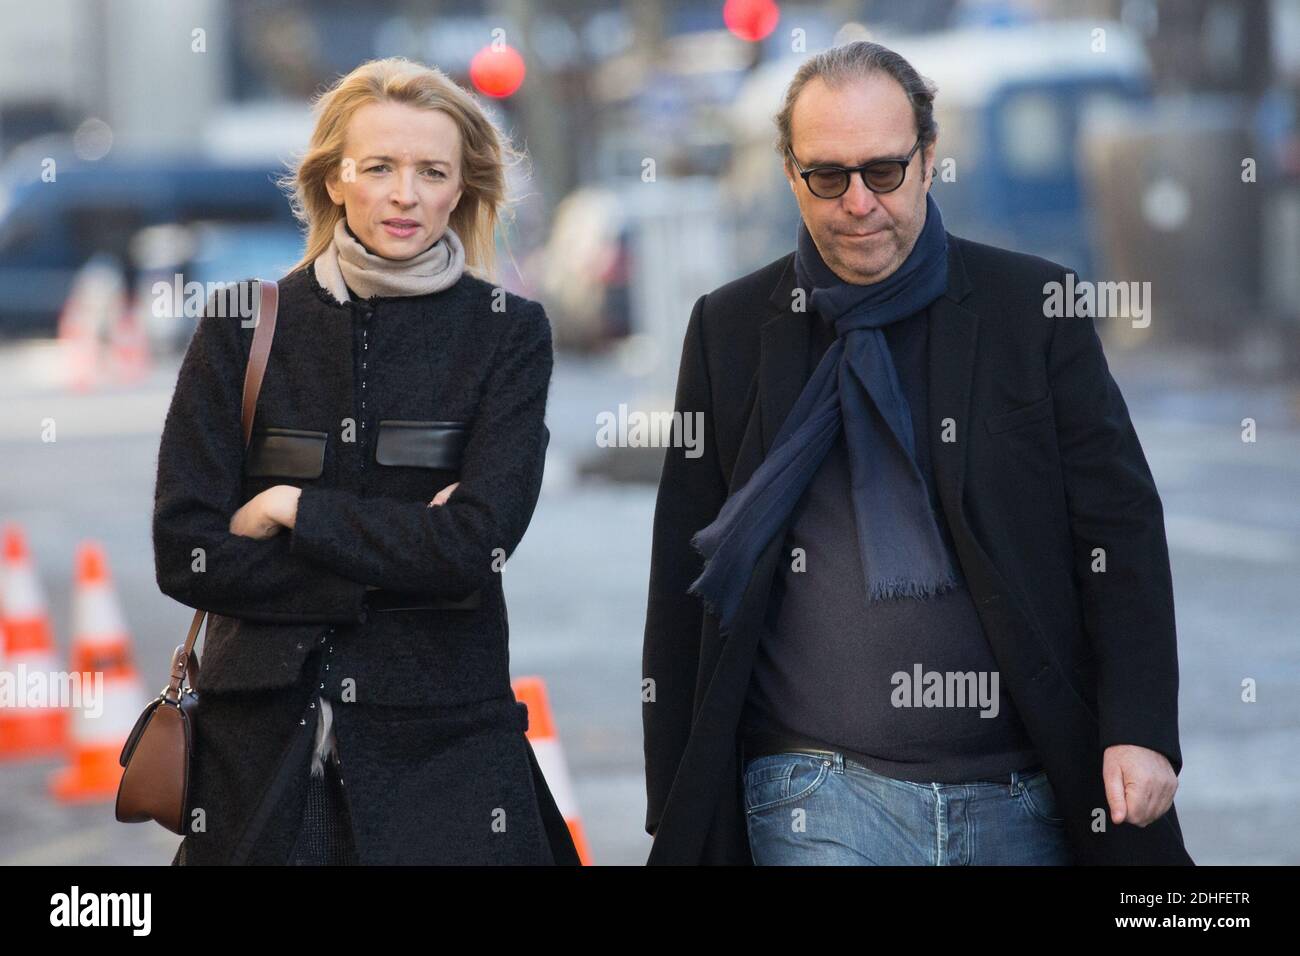 Xavier Niel and Delphine Arnault in stands during French Tennis